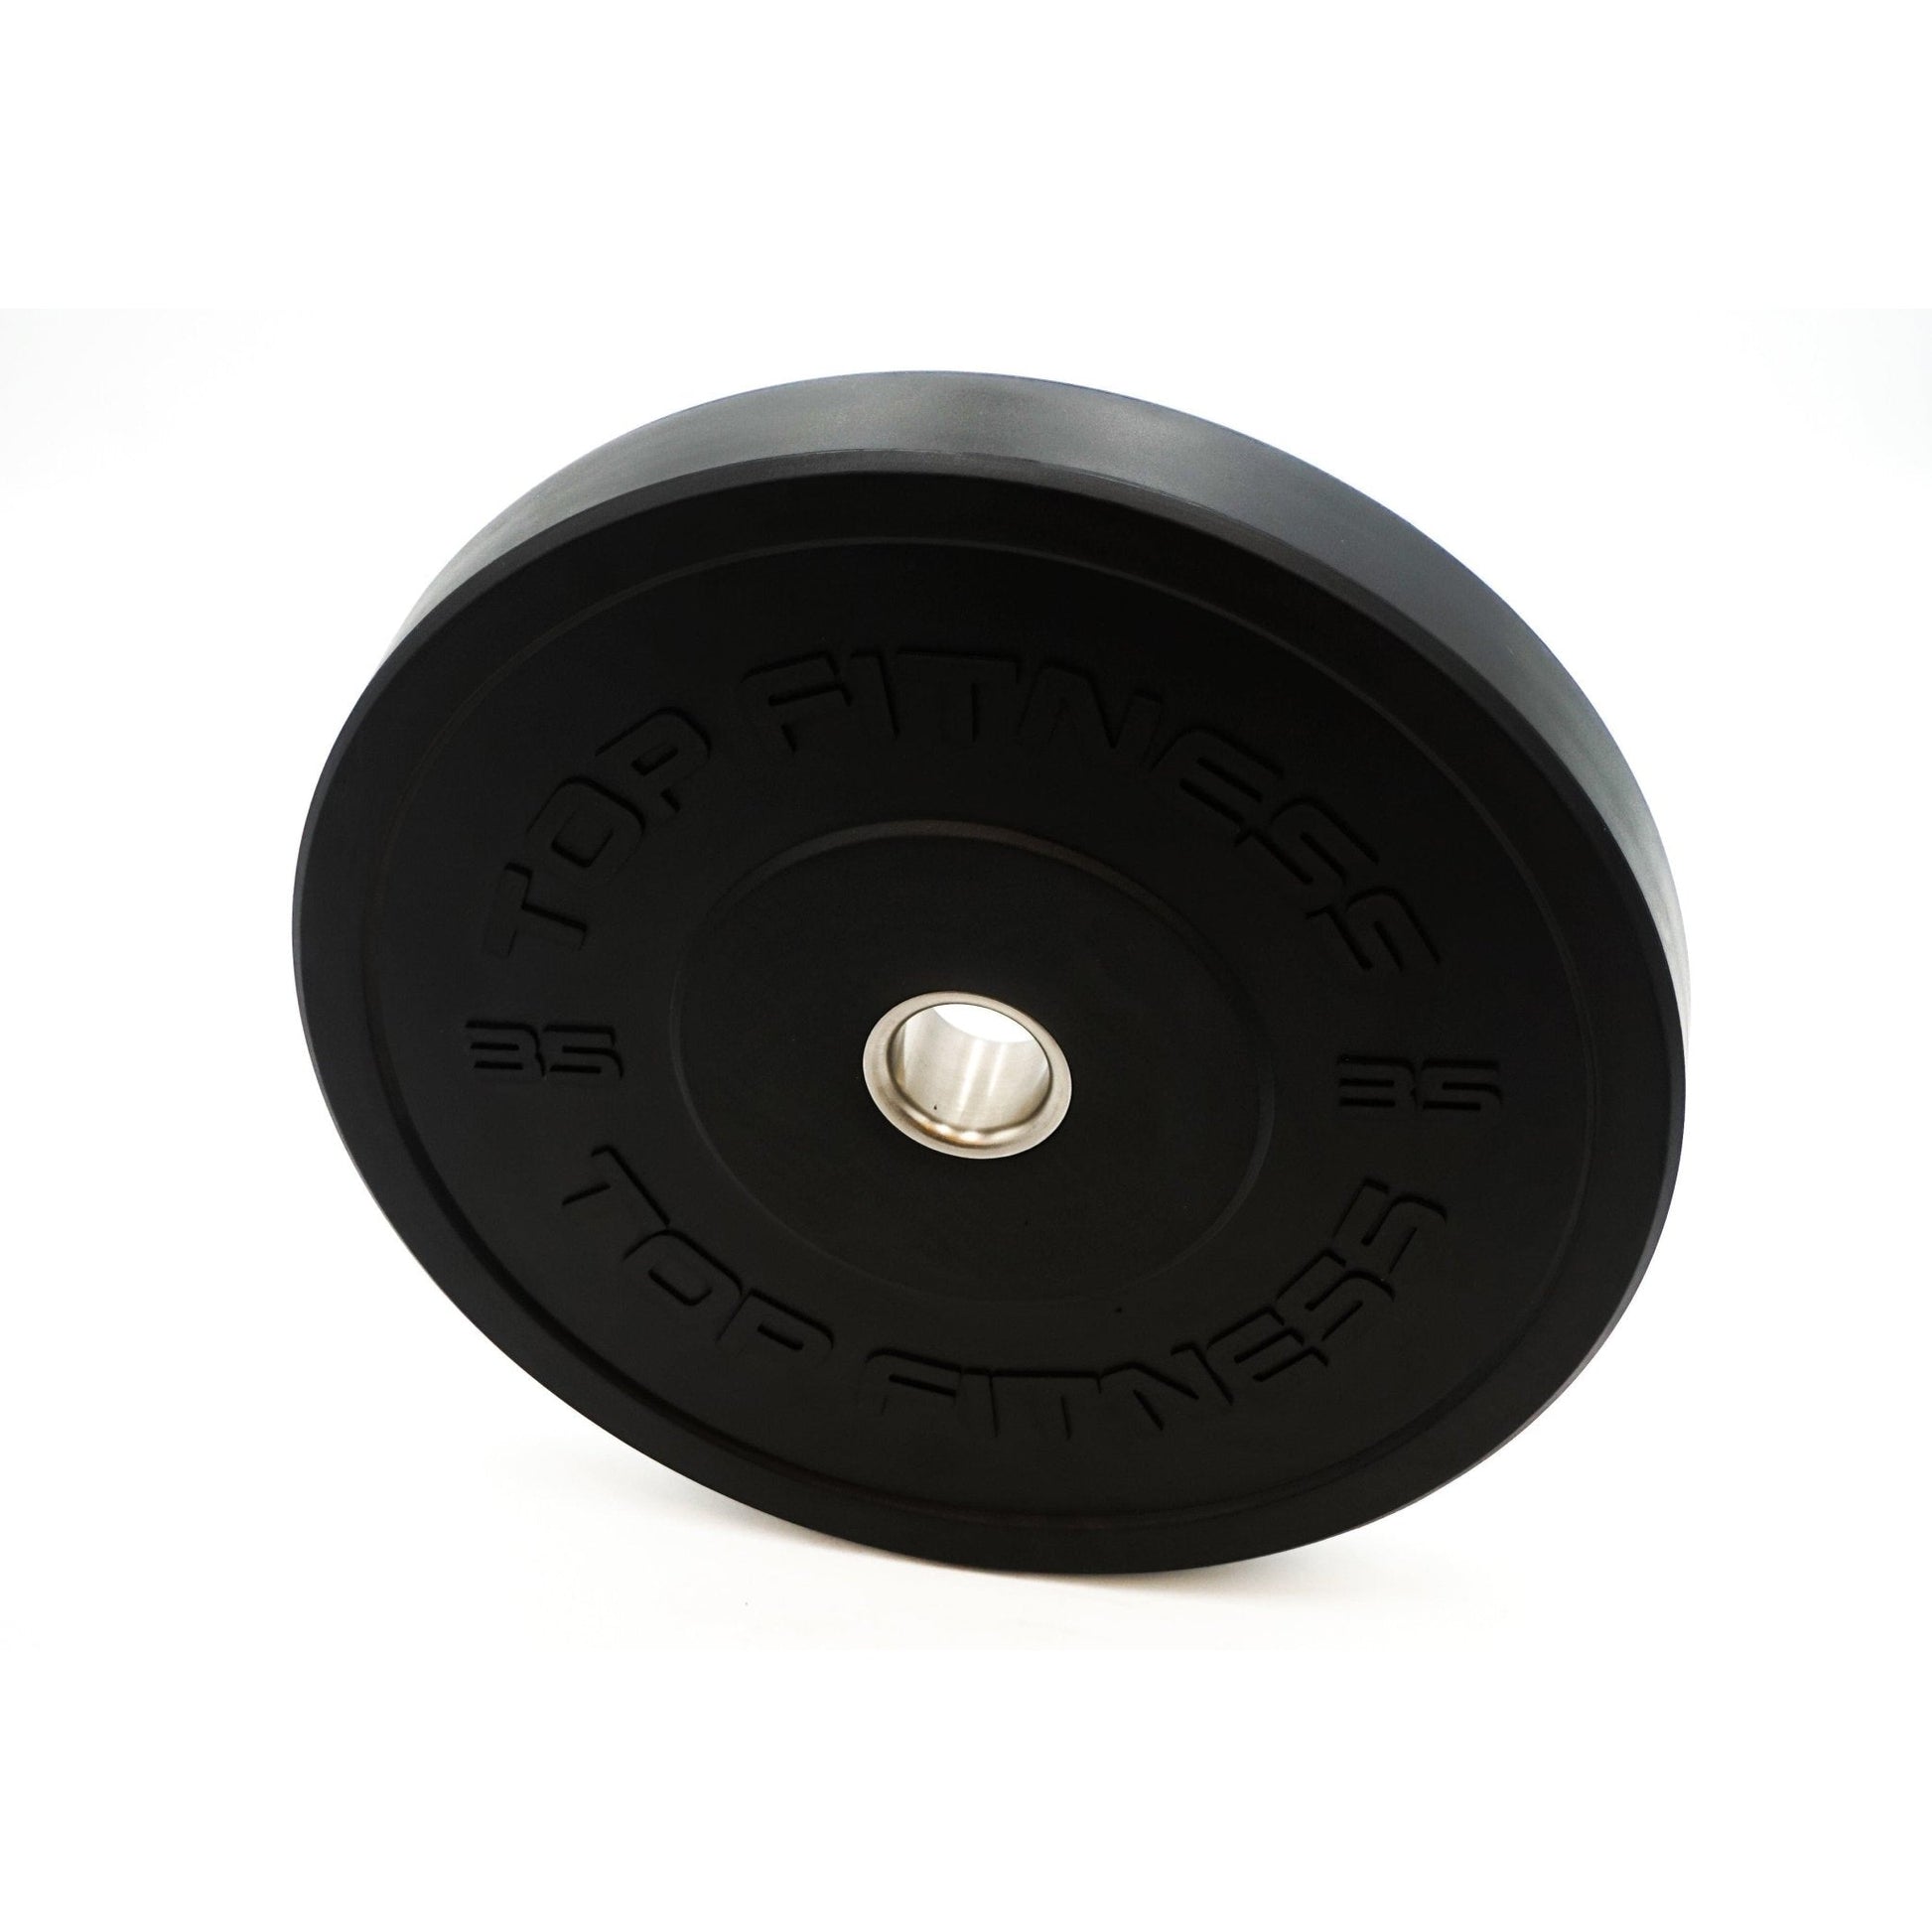 Top Fitness Olympic Bumper Plate Weight Plates Top Fitness 35LB